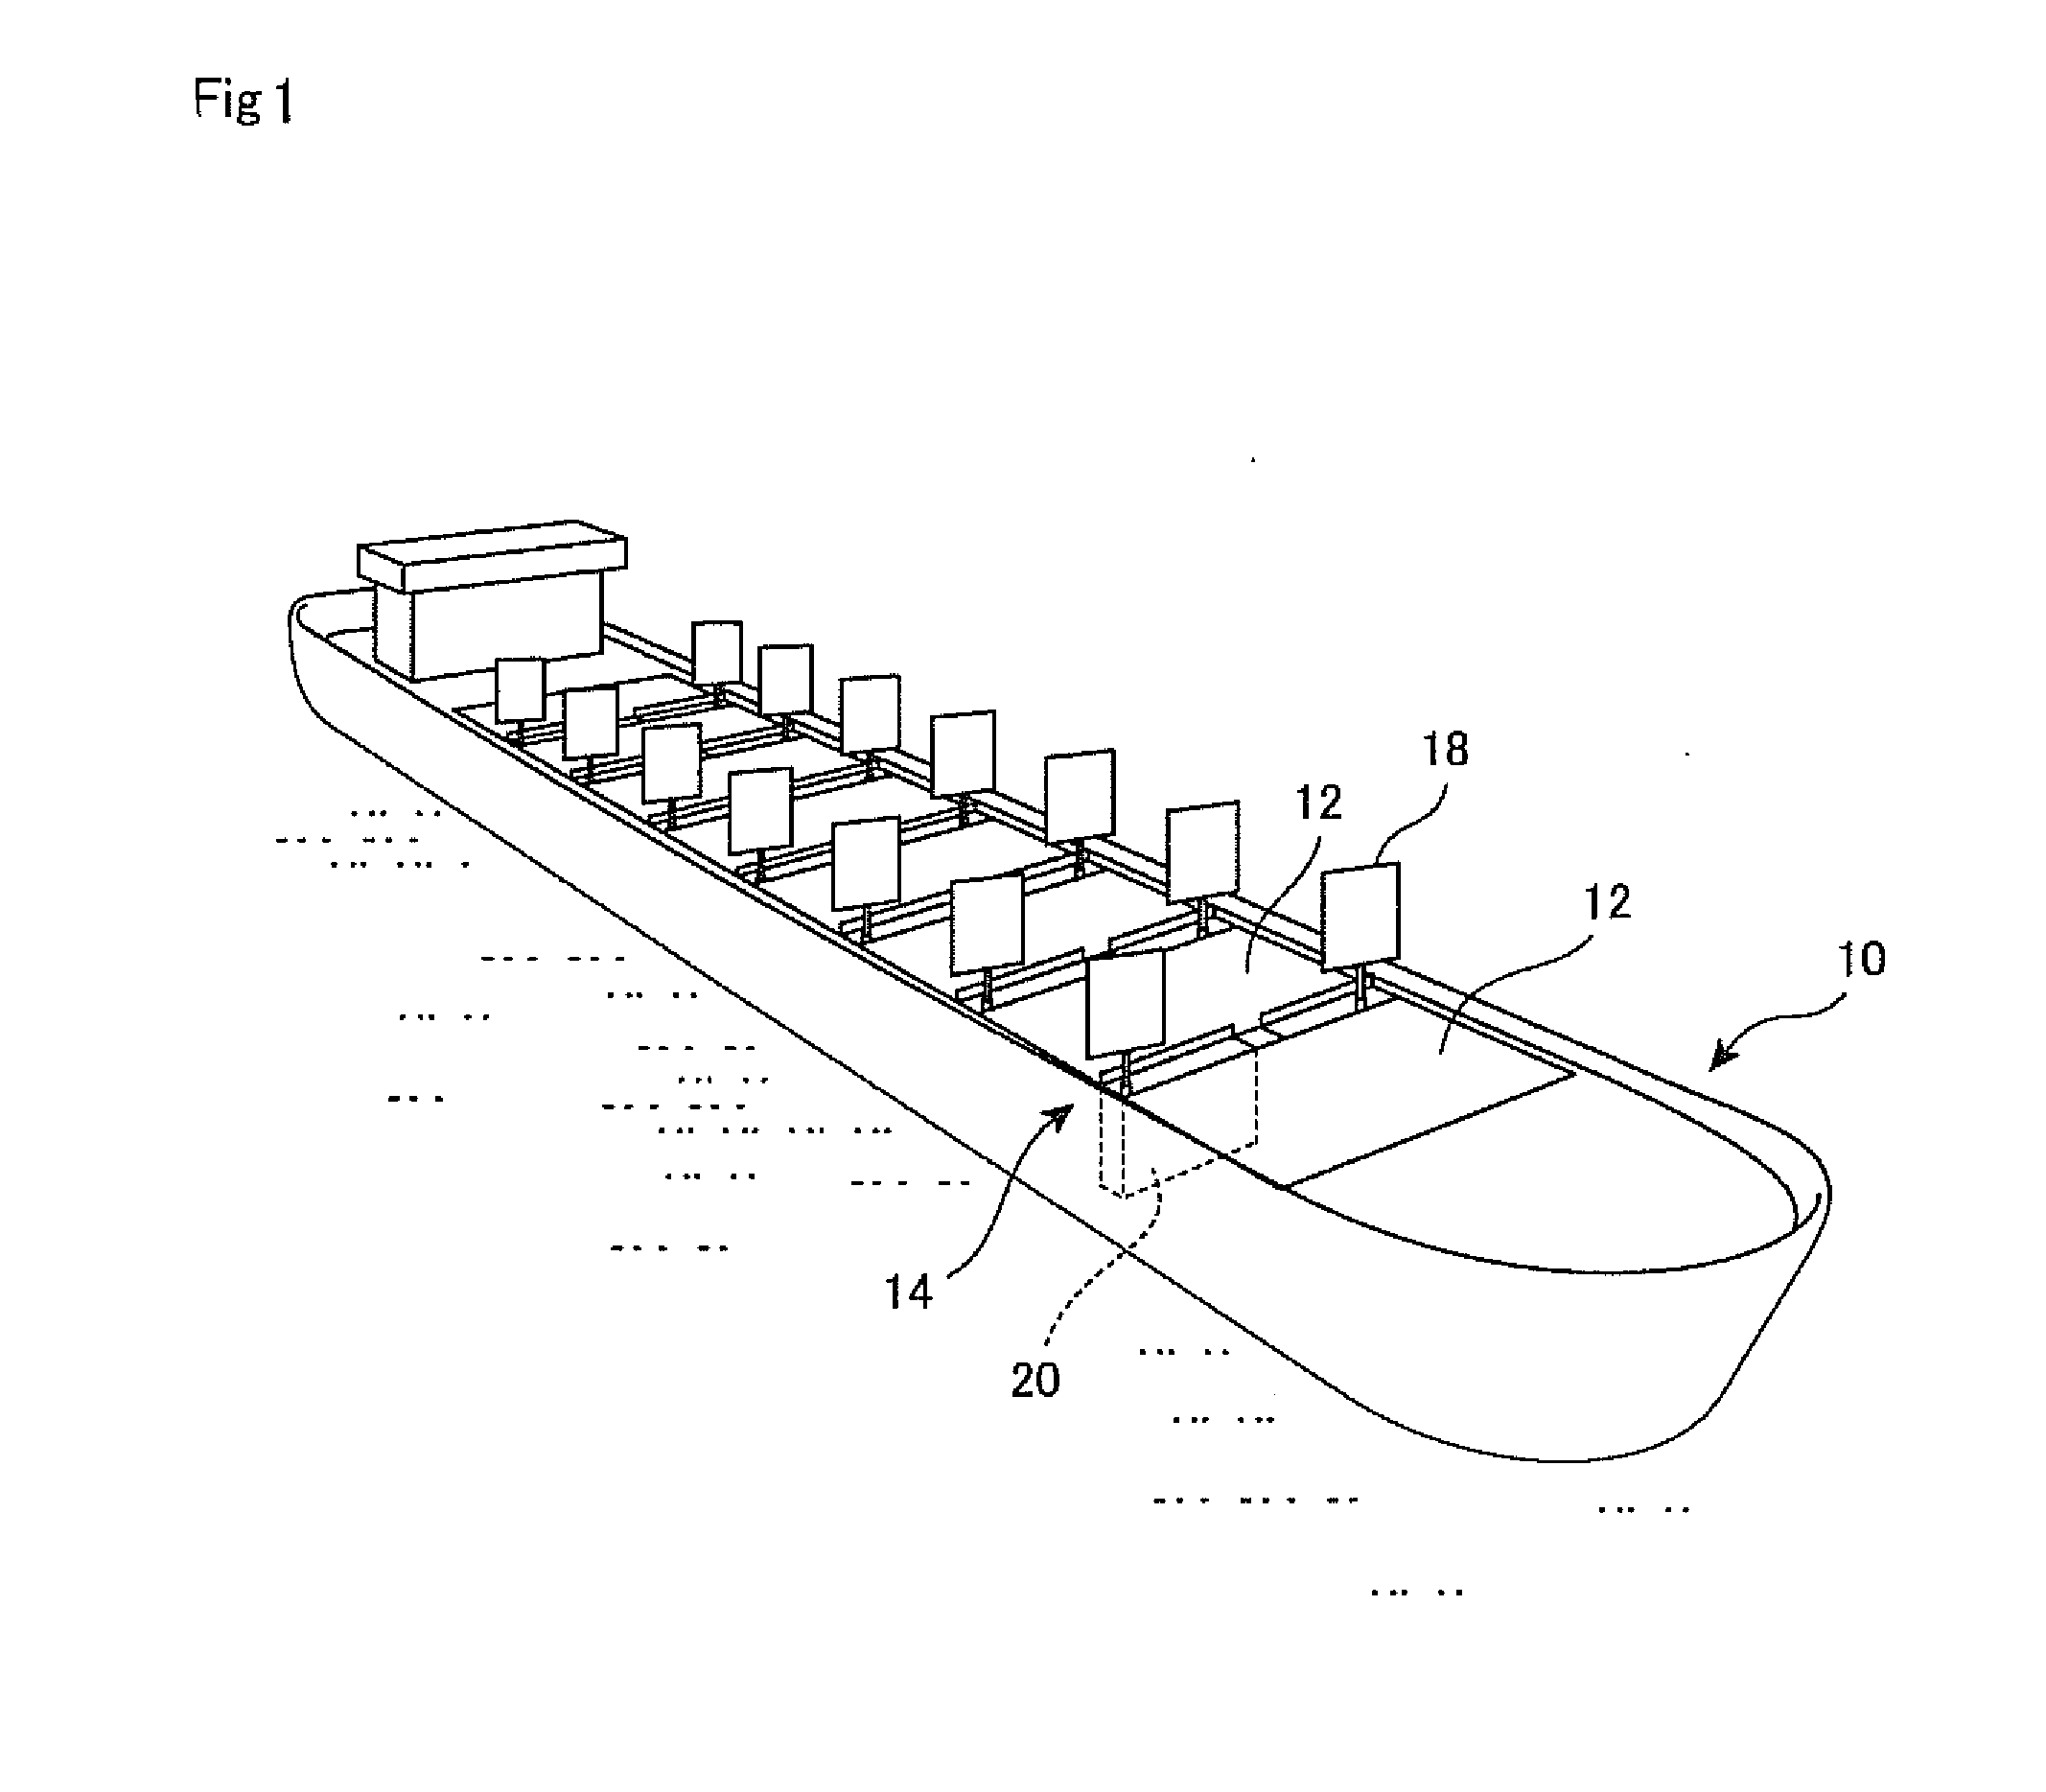 Power module for use in marine vessel, and wind-propelled vessel provided with said power module